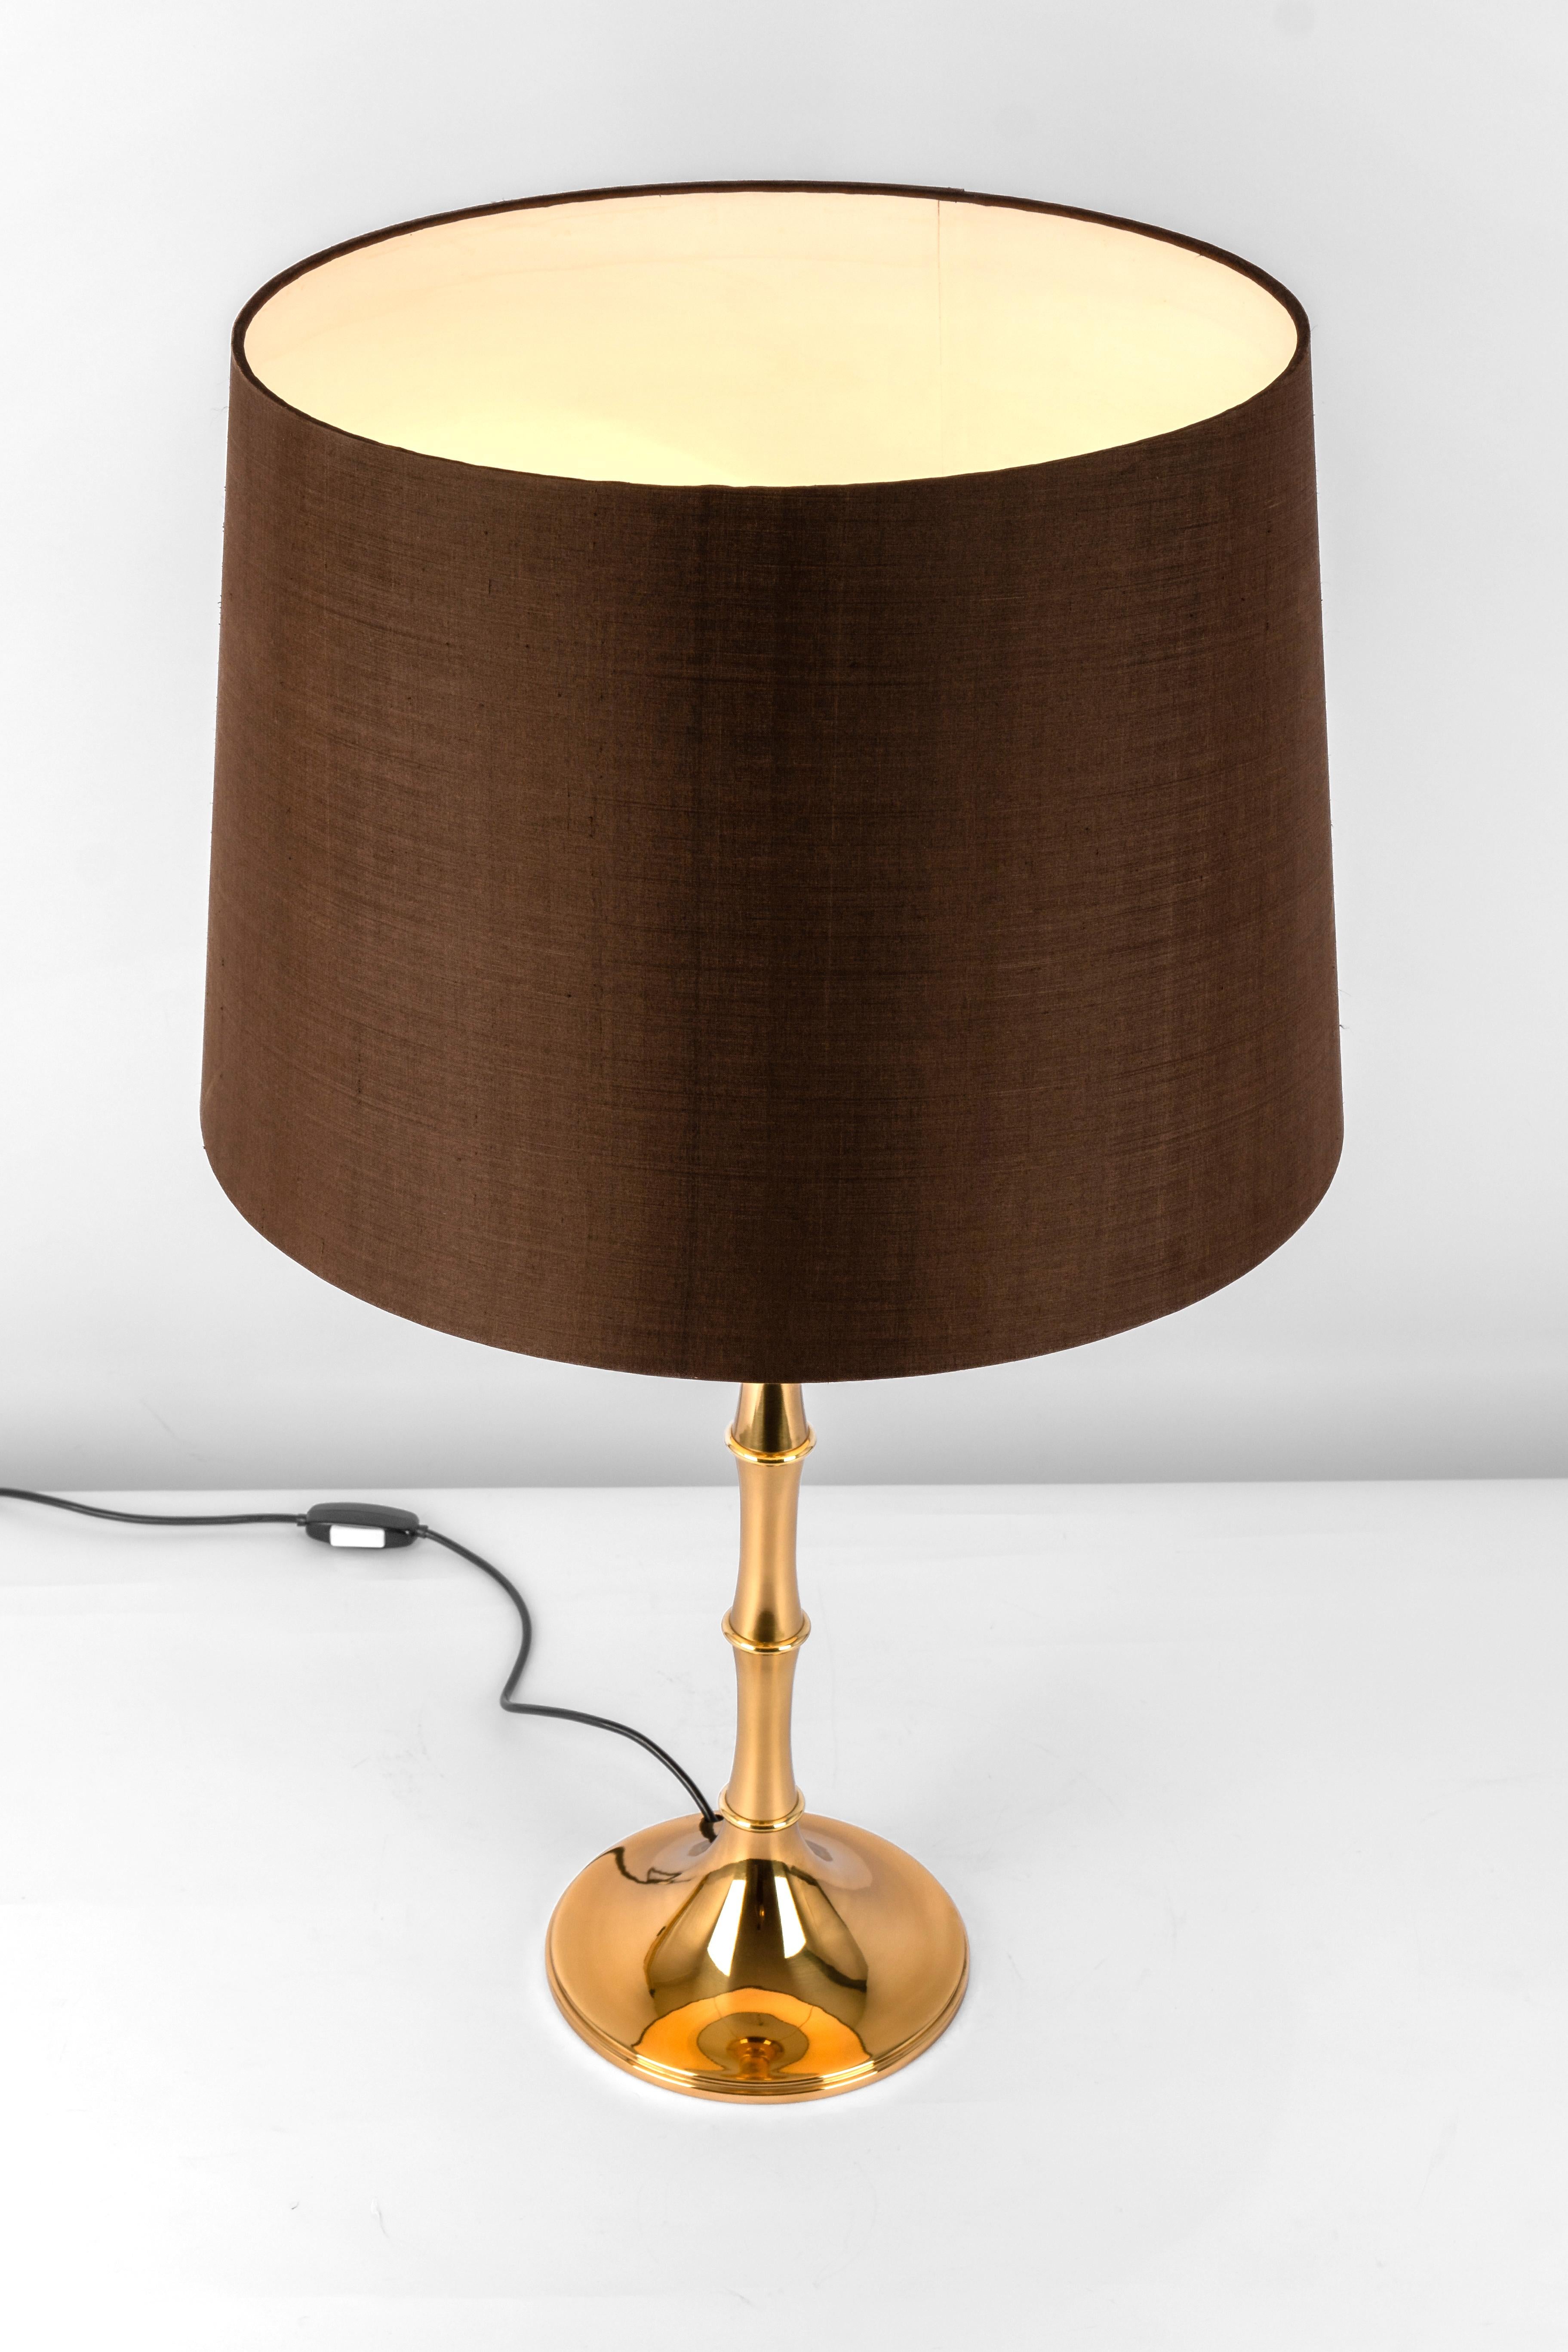 Pair of Bamboo Table Lamps by Ingo Maurer, Germany, 1970s For Sale 3